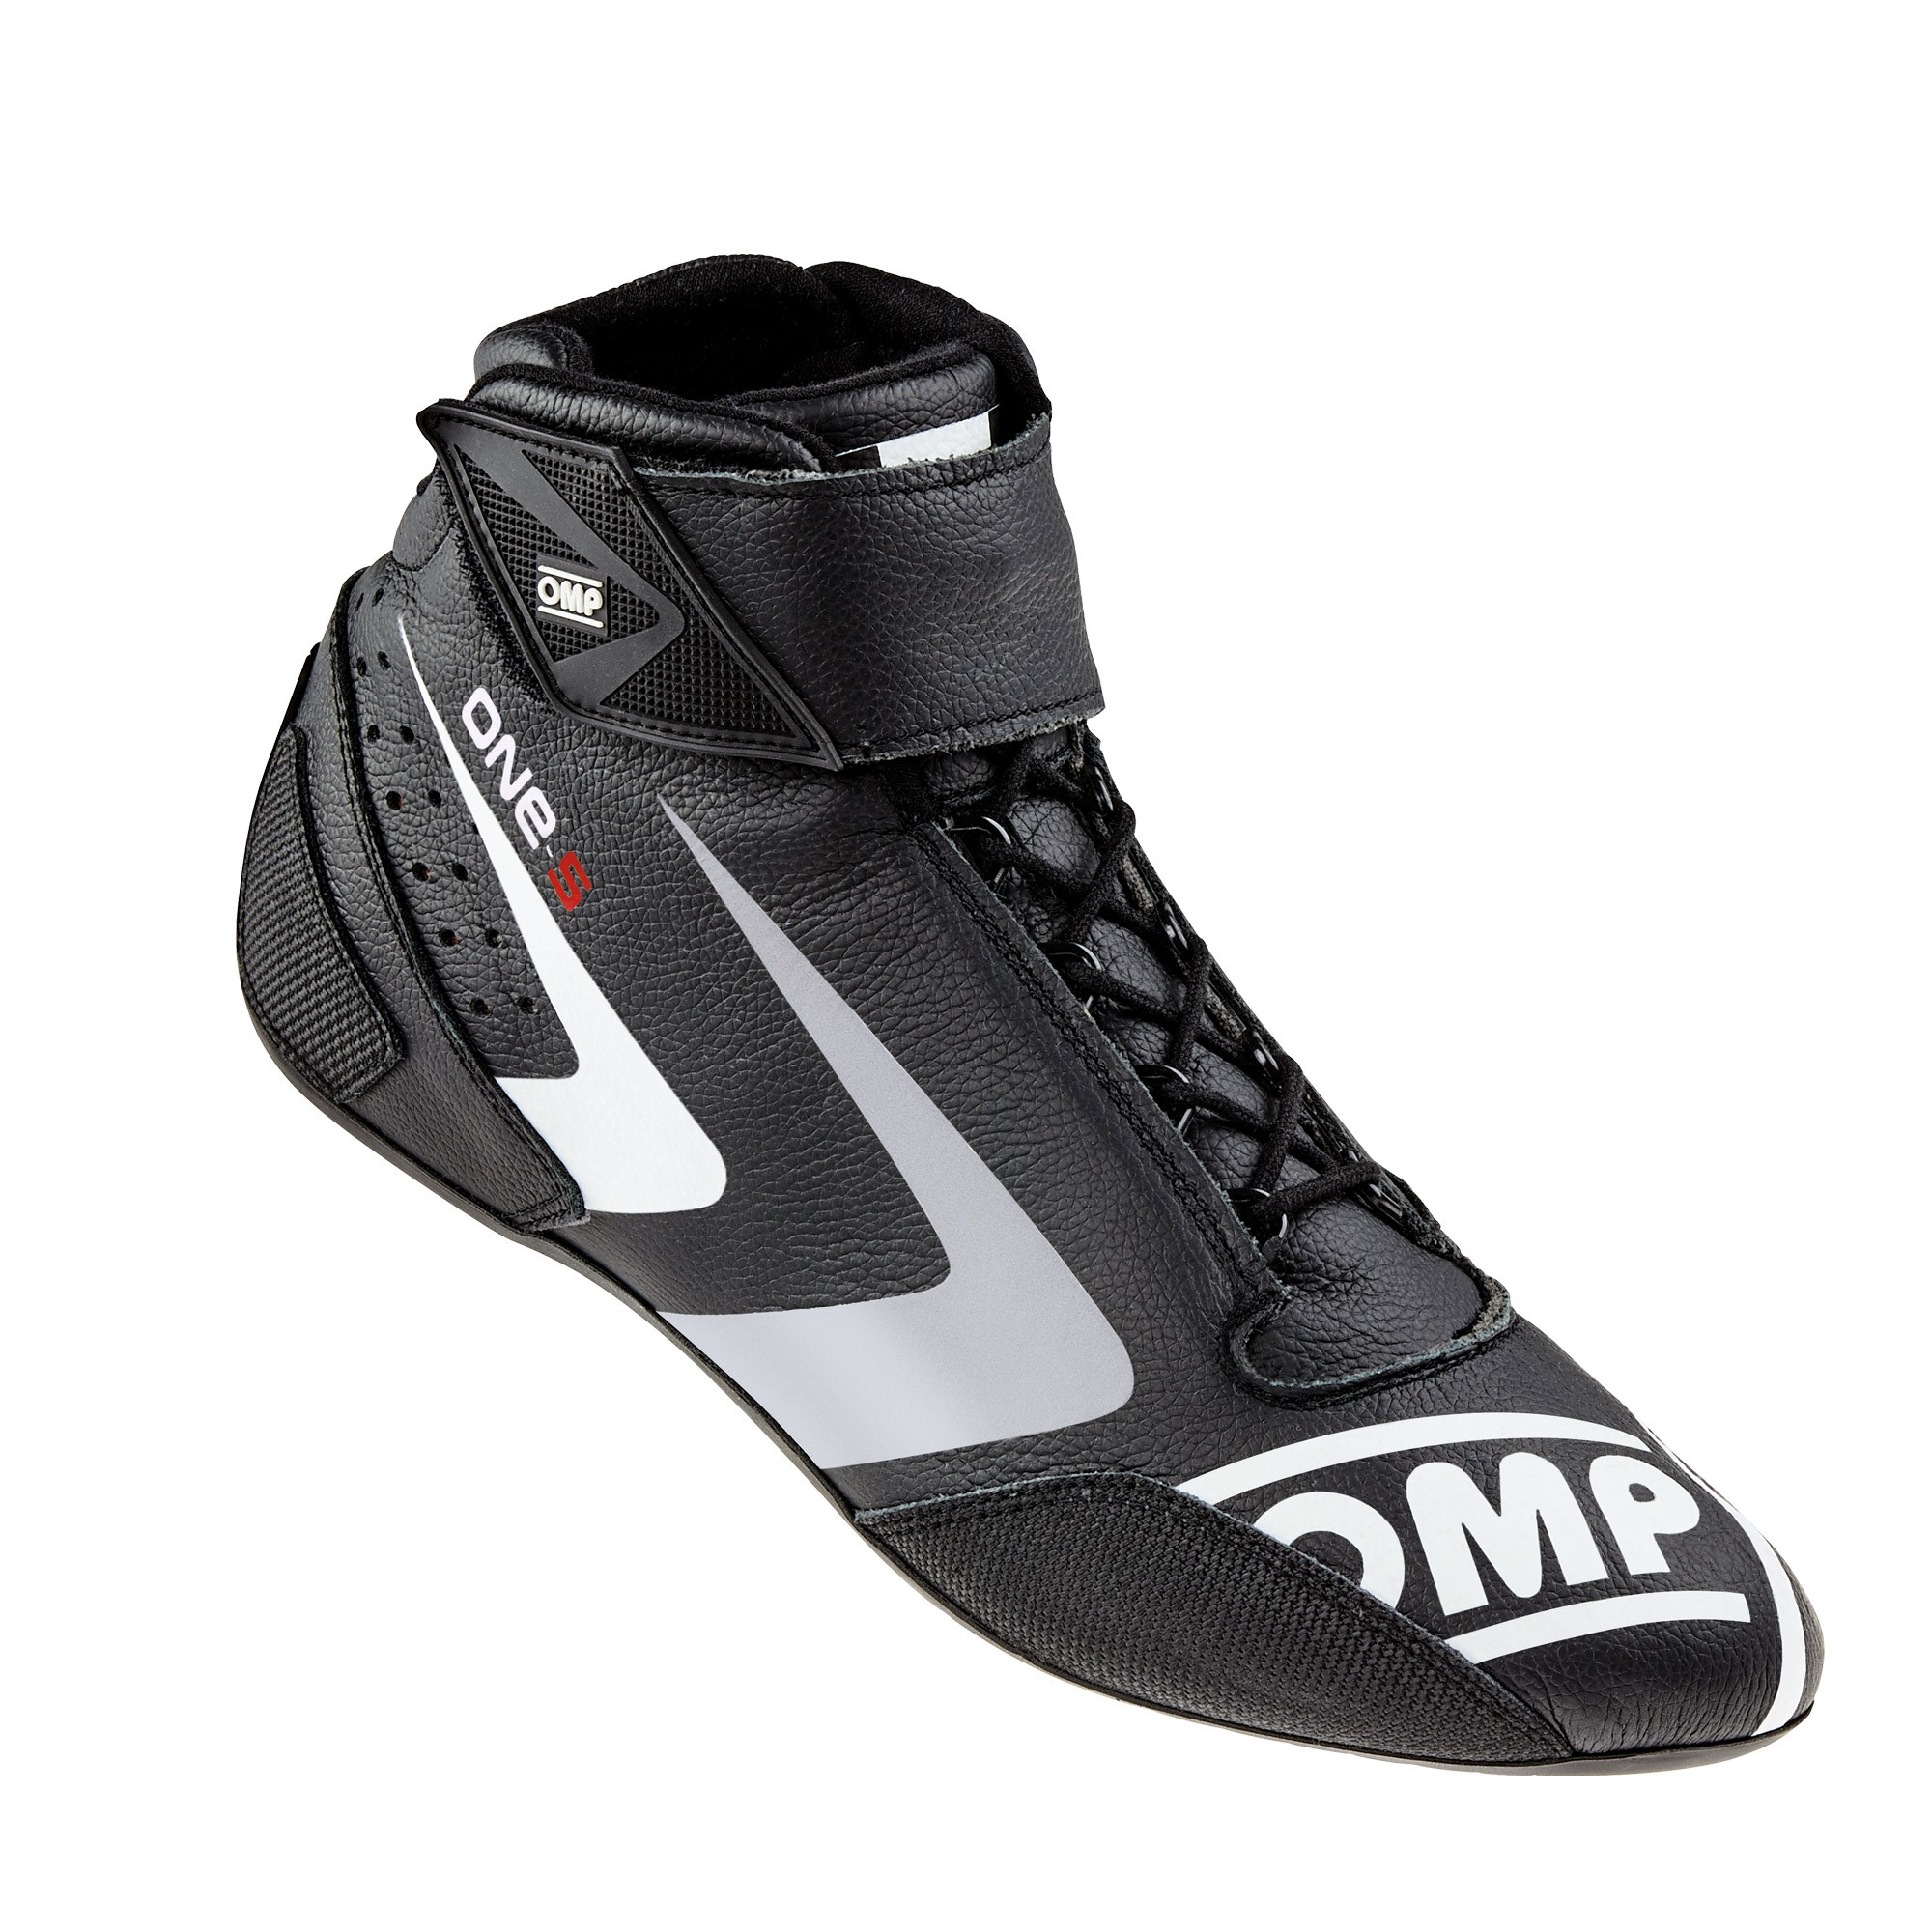 ONE-S SHOES MY 2016 - Racing boots | OMP RACING